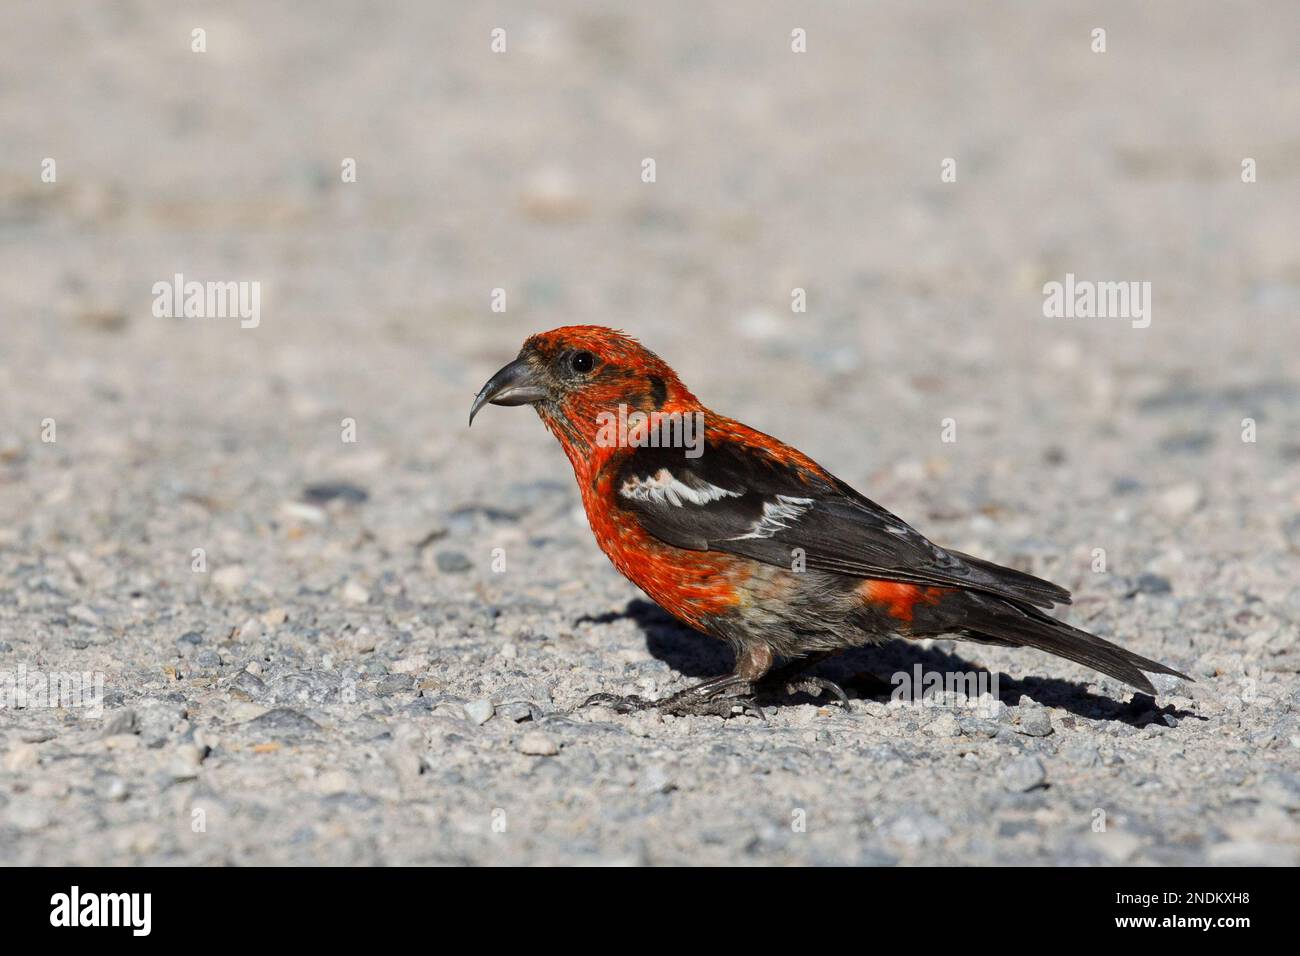 White-winged crossbill male bird on the ground to eat grit for digestion. Jasper National Park, Alberta, Canada. (Loxia leucoptera leucoptera) Stock Photo